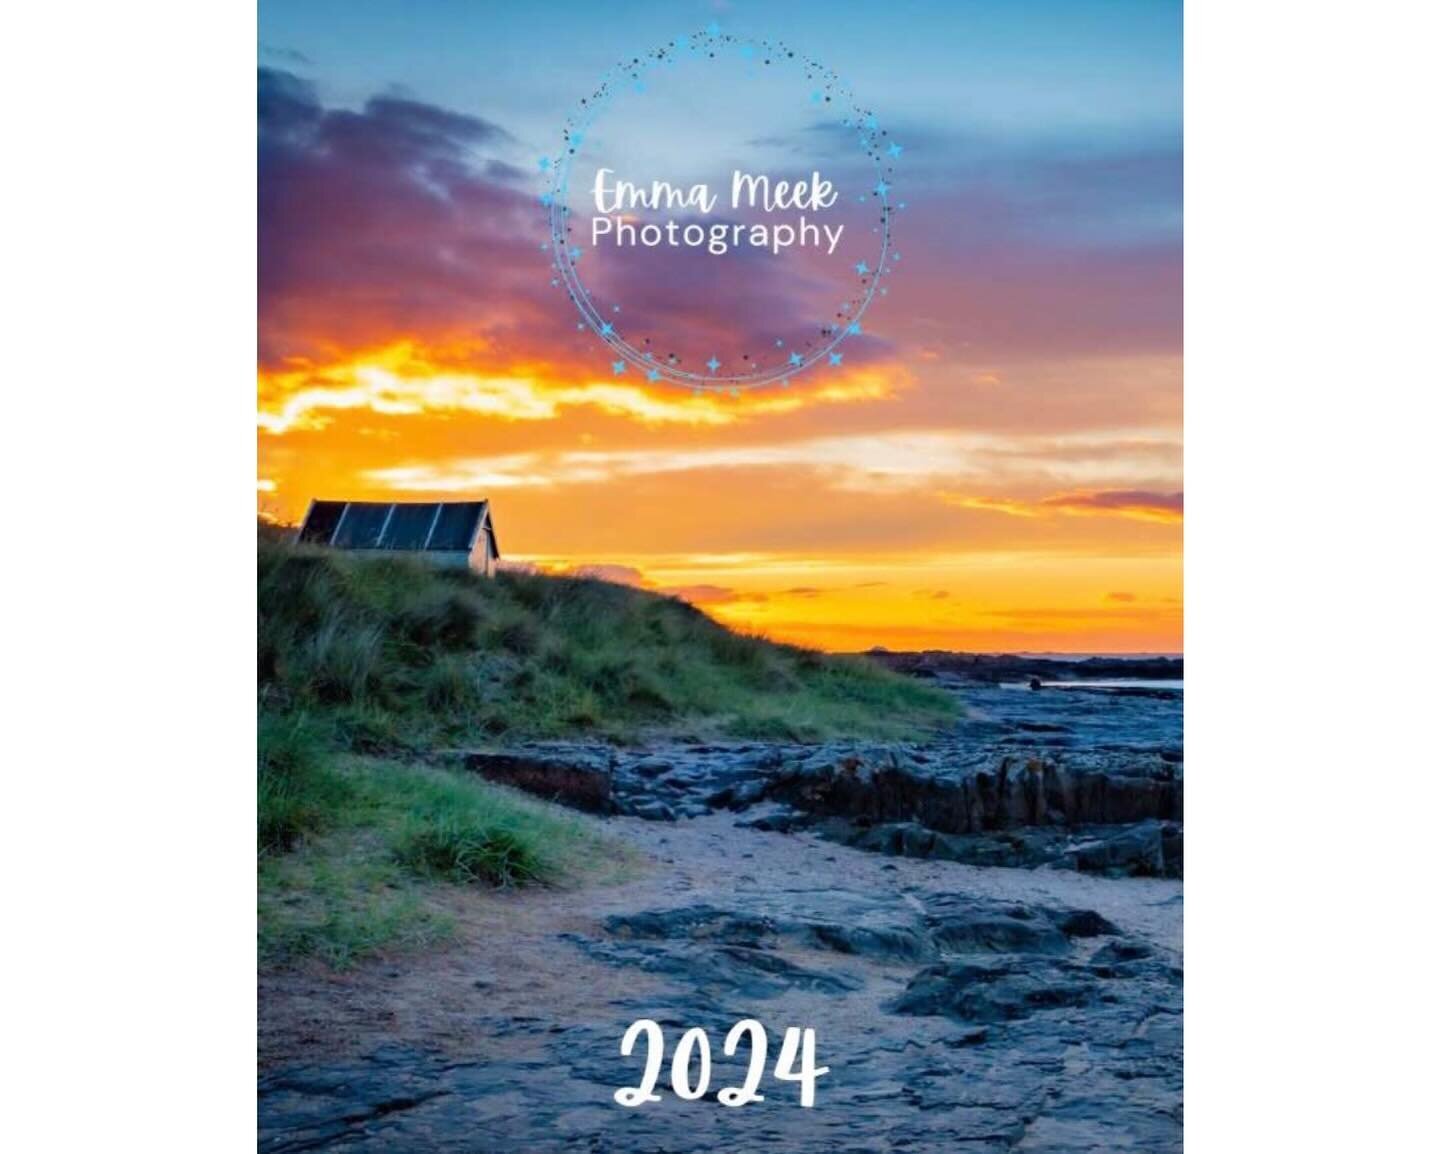 LAST 4 AVAILABLE!
Hello! I just wanted to let you know that I have only 4 2024 calendars left! These calendars feature some of my favourite photographs and would make a great Christmas present! The calendars are A4 in size and cost &pound;14 each inc